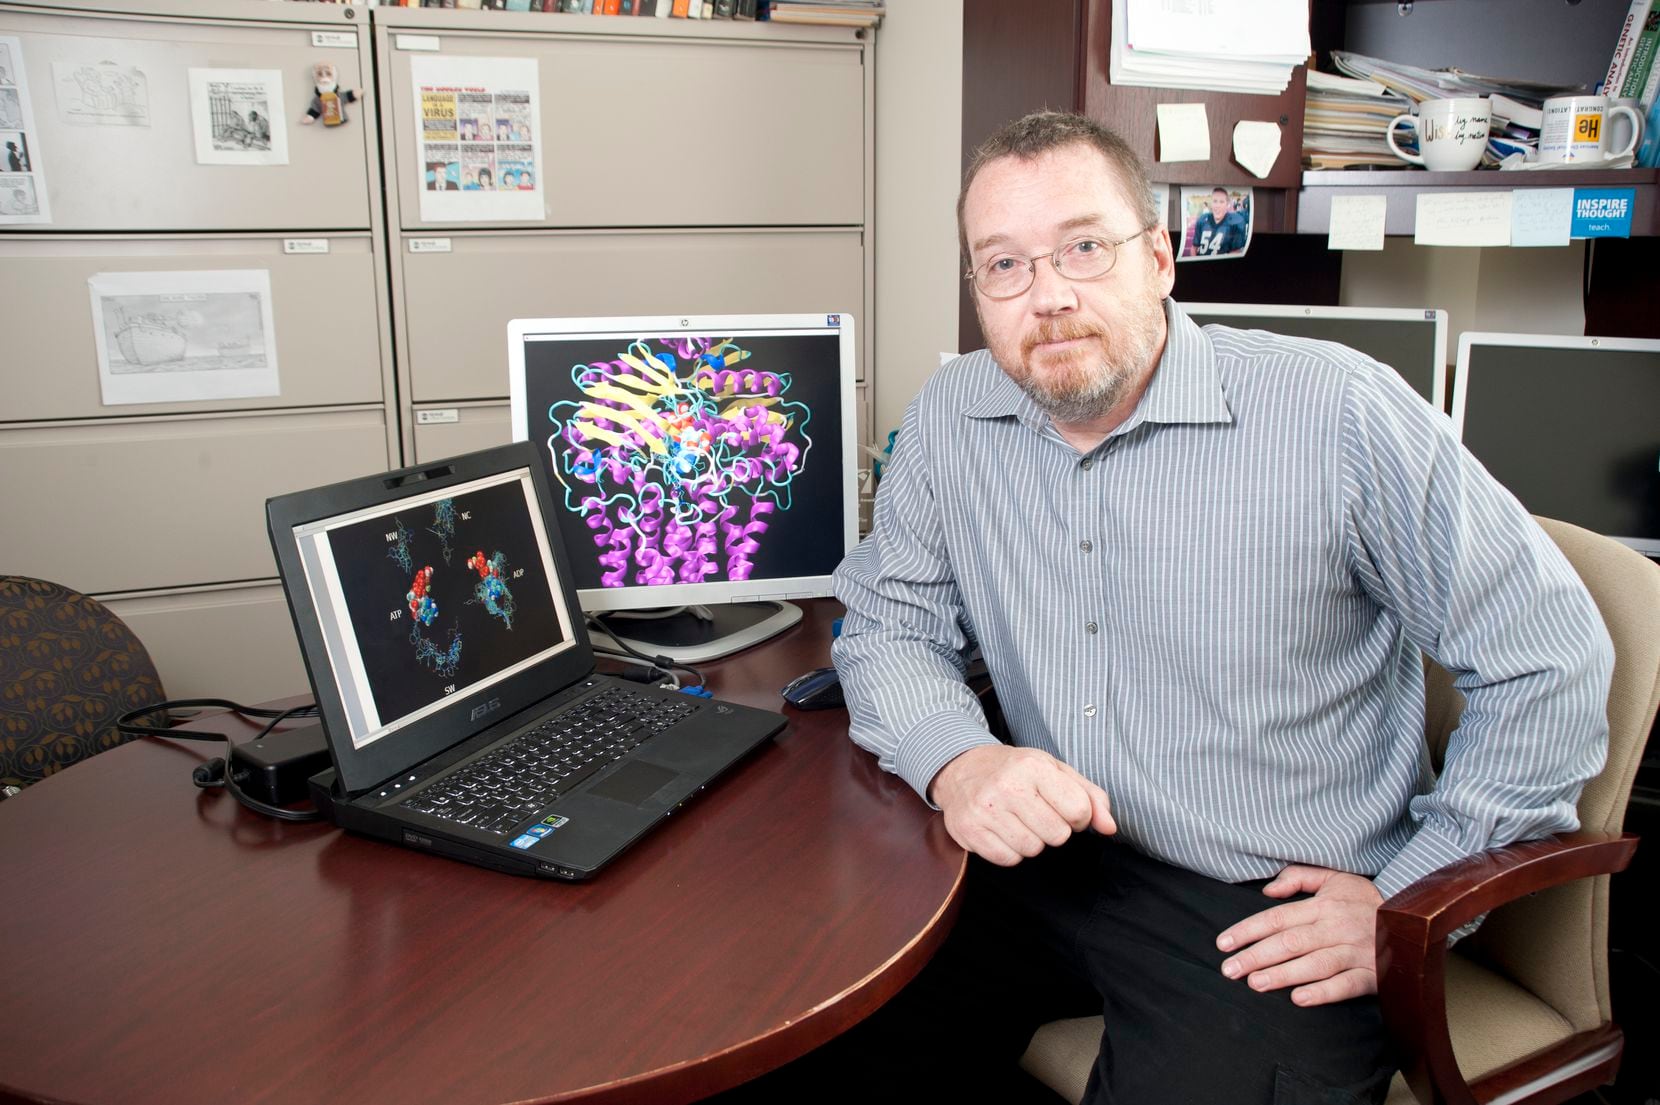 John Wise, an associate professor of biochemistry at SMU, was the senior investigator for this study. The Vogel and Wise research group at SMU uses computational modeling to simulate how proteins move and interact with each other.